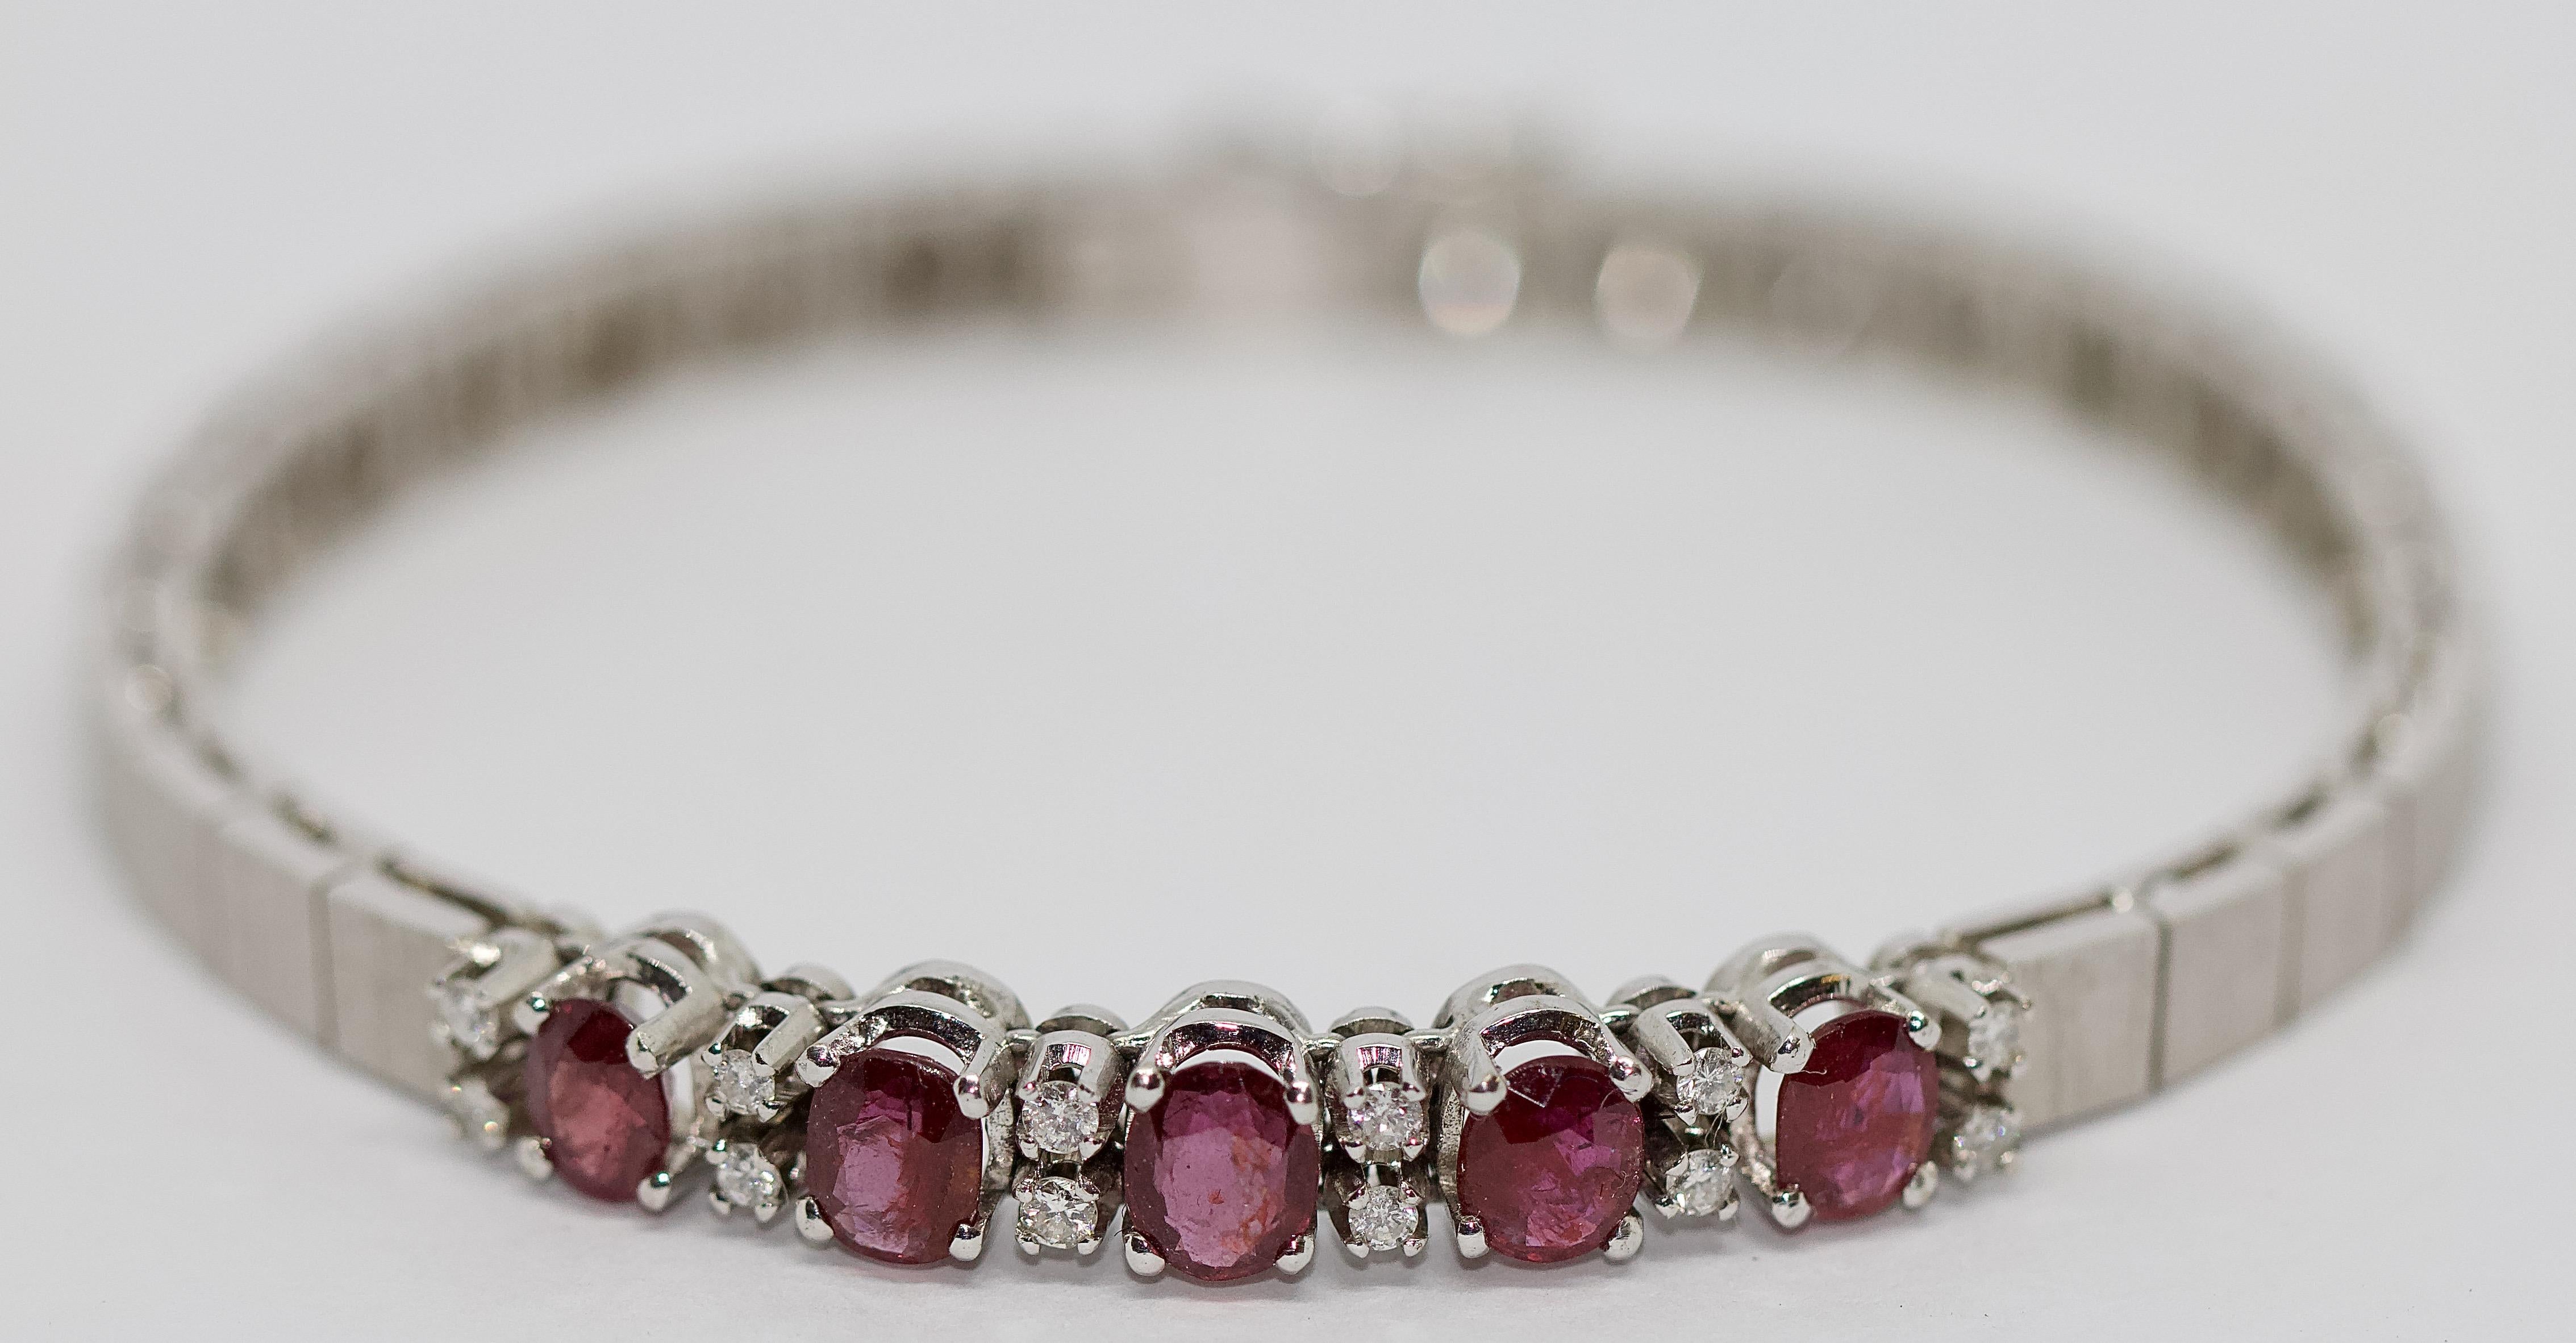 Ladies 14K White Gold Bracelet with Rubies and Diamonds.

Total carat diamonds: 0.25

Bracelet is hallmarked.

Including certificate of authenticity.